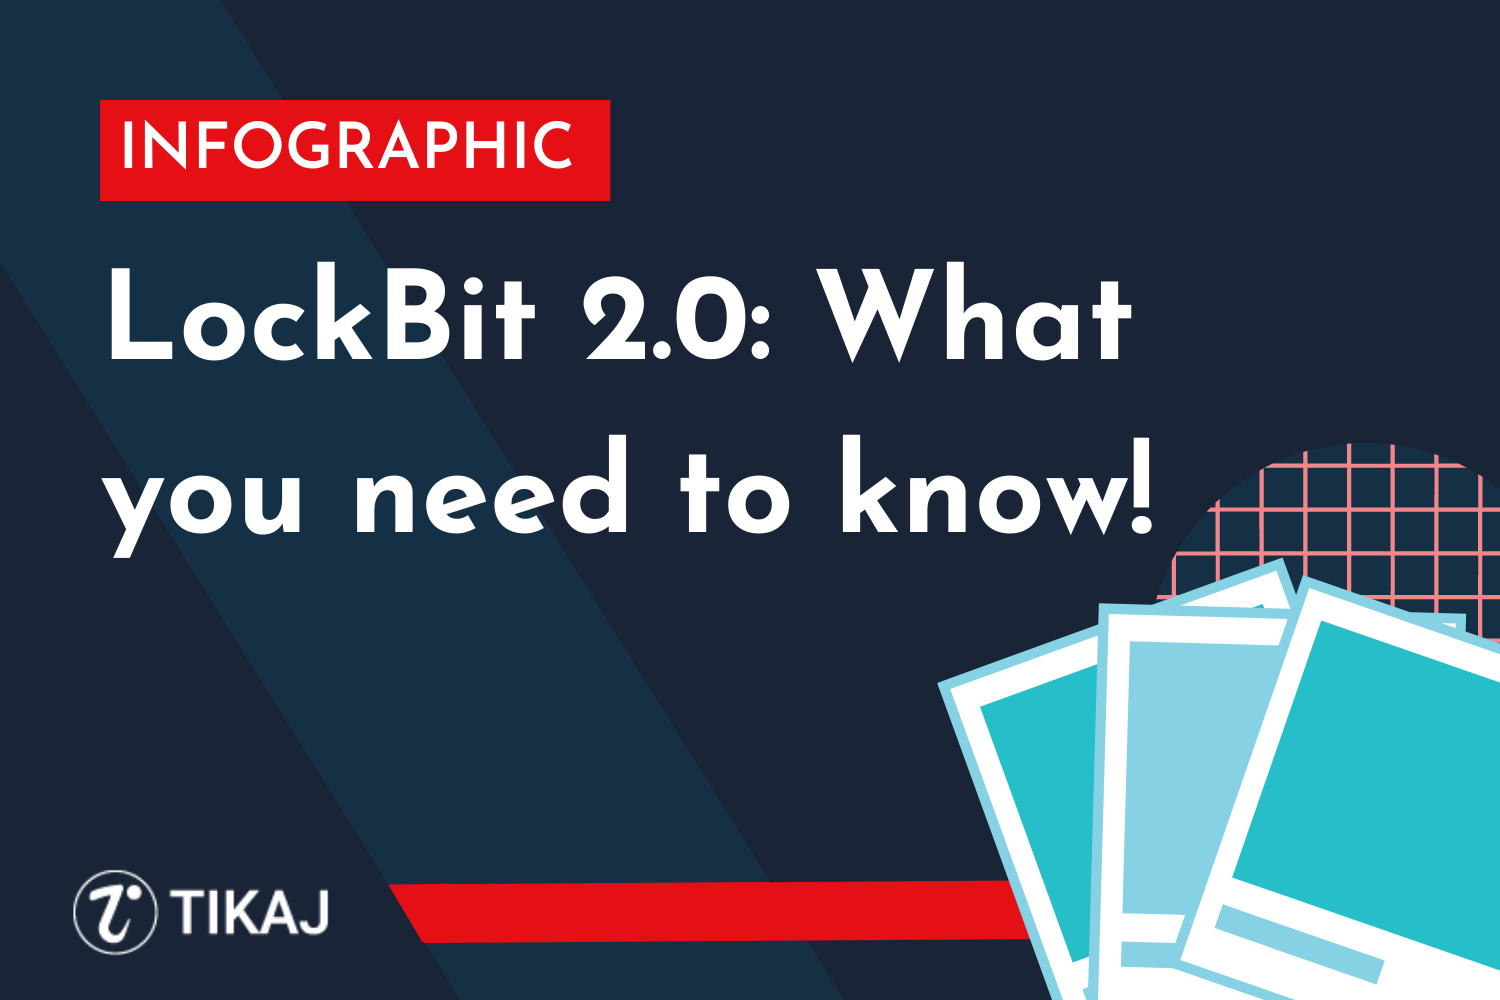 LockBit 2.0: What you need to know!